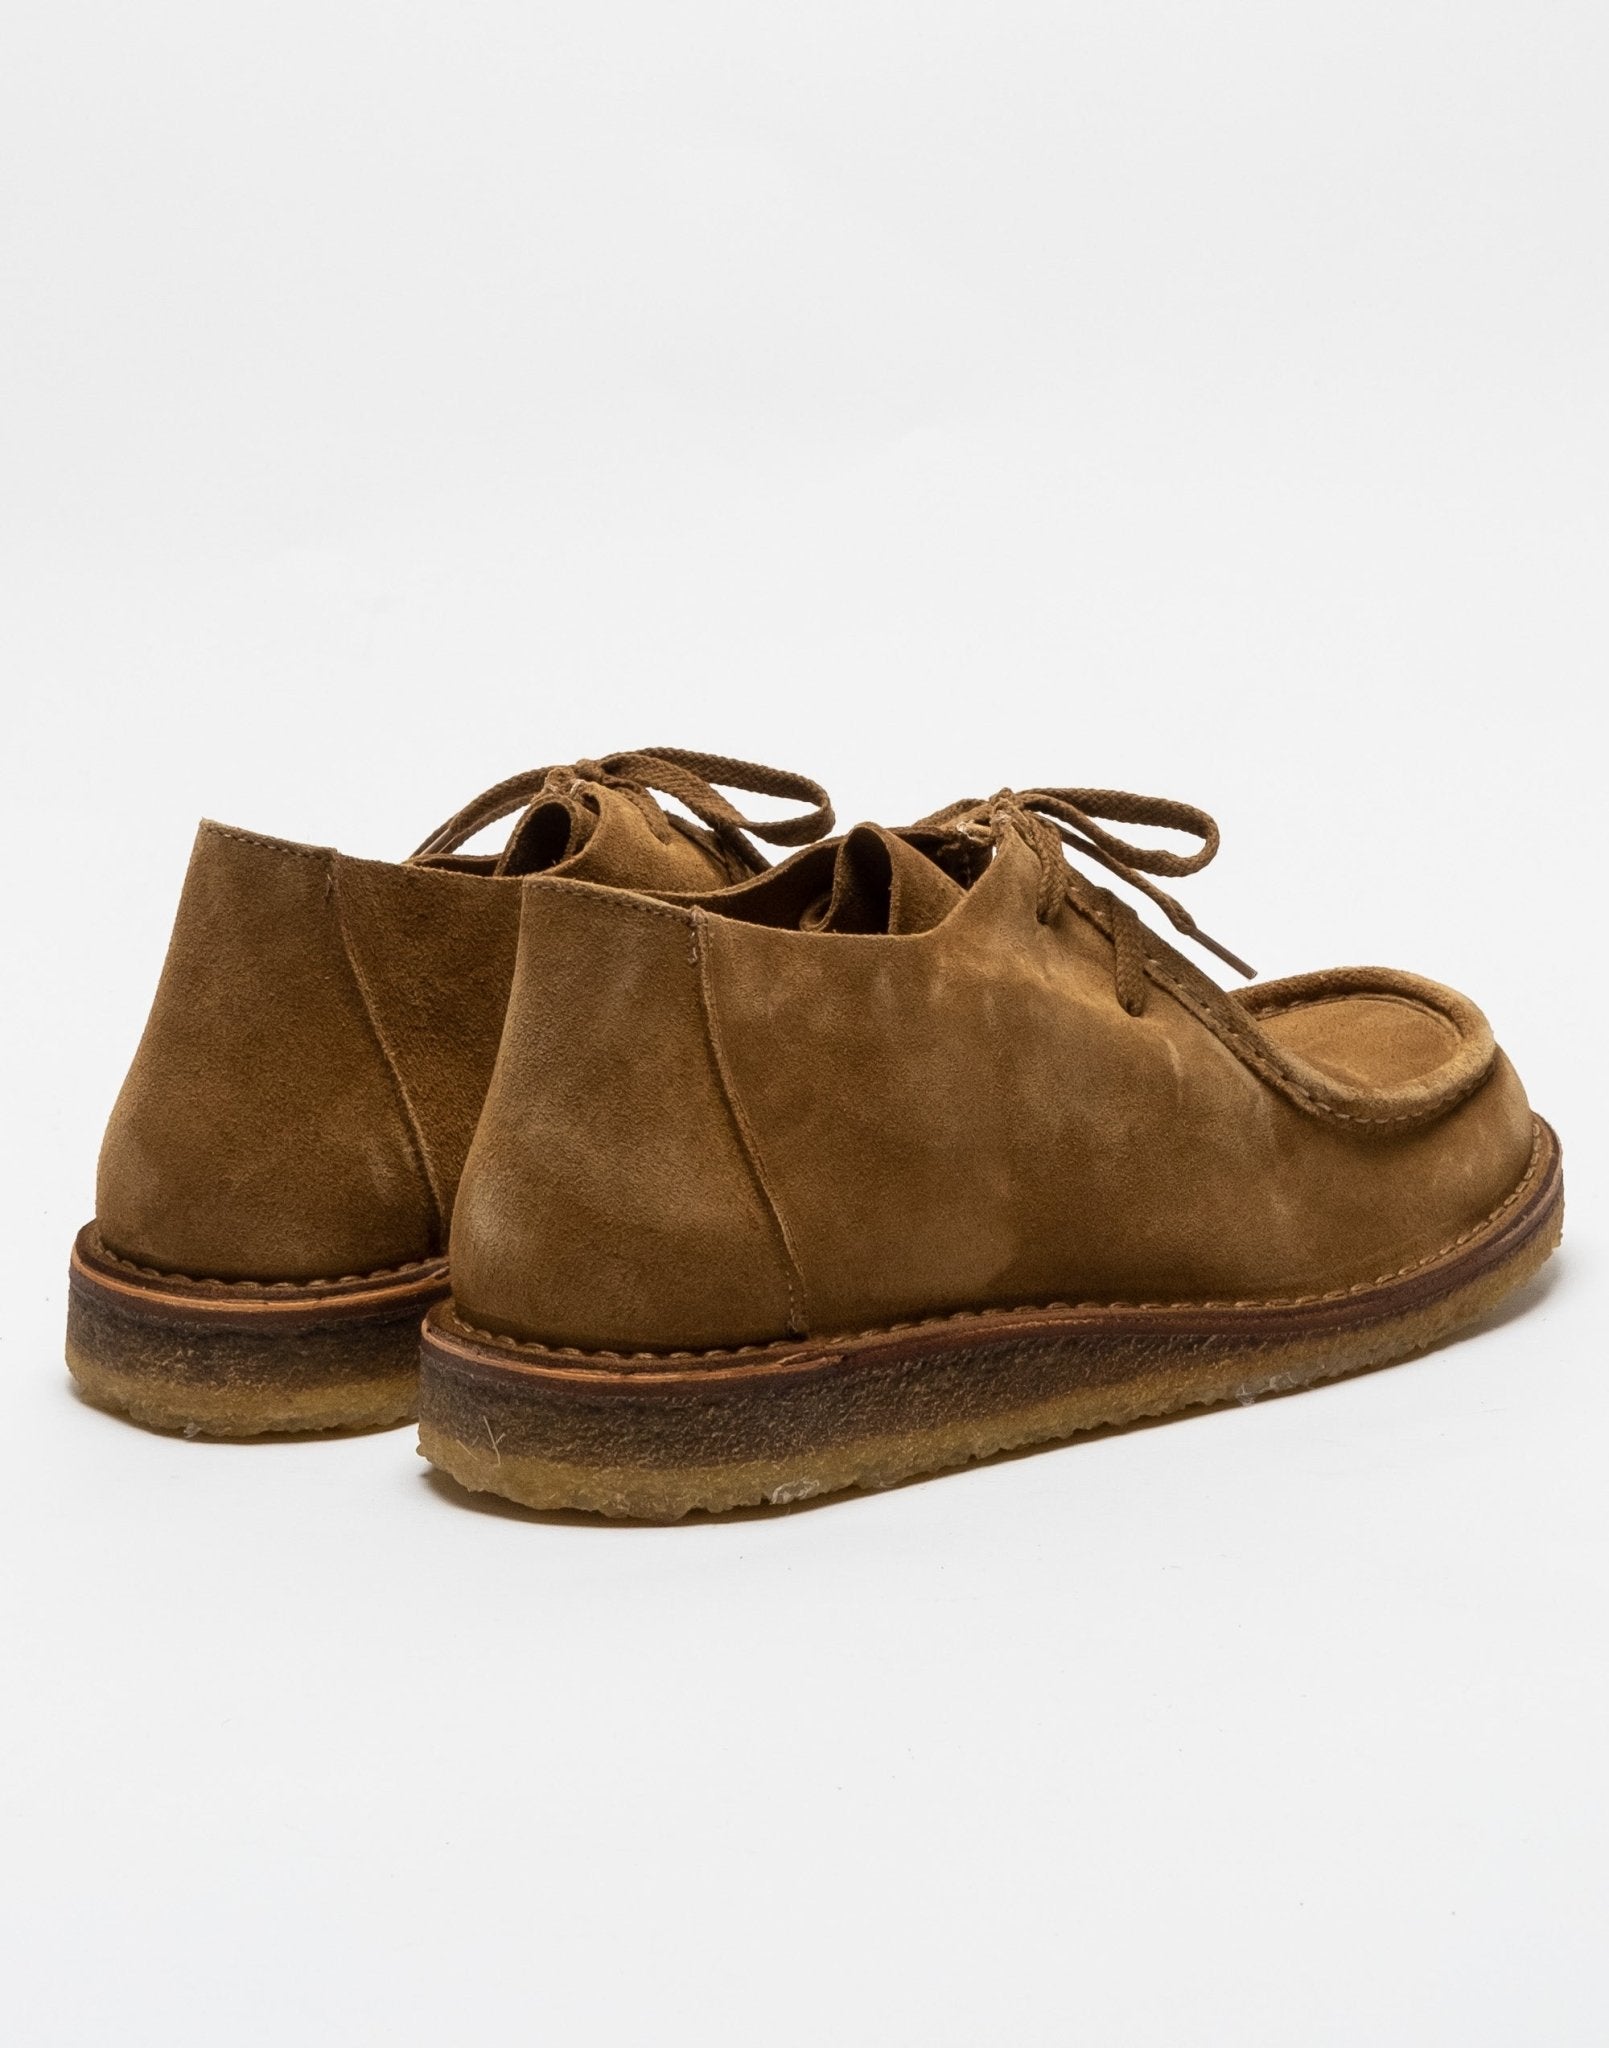 Beenflex Shoes Whiskey - Meadow